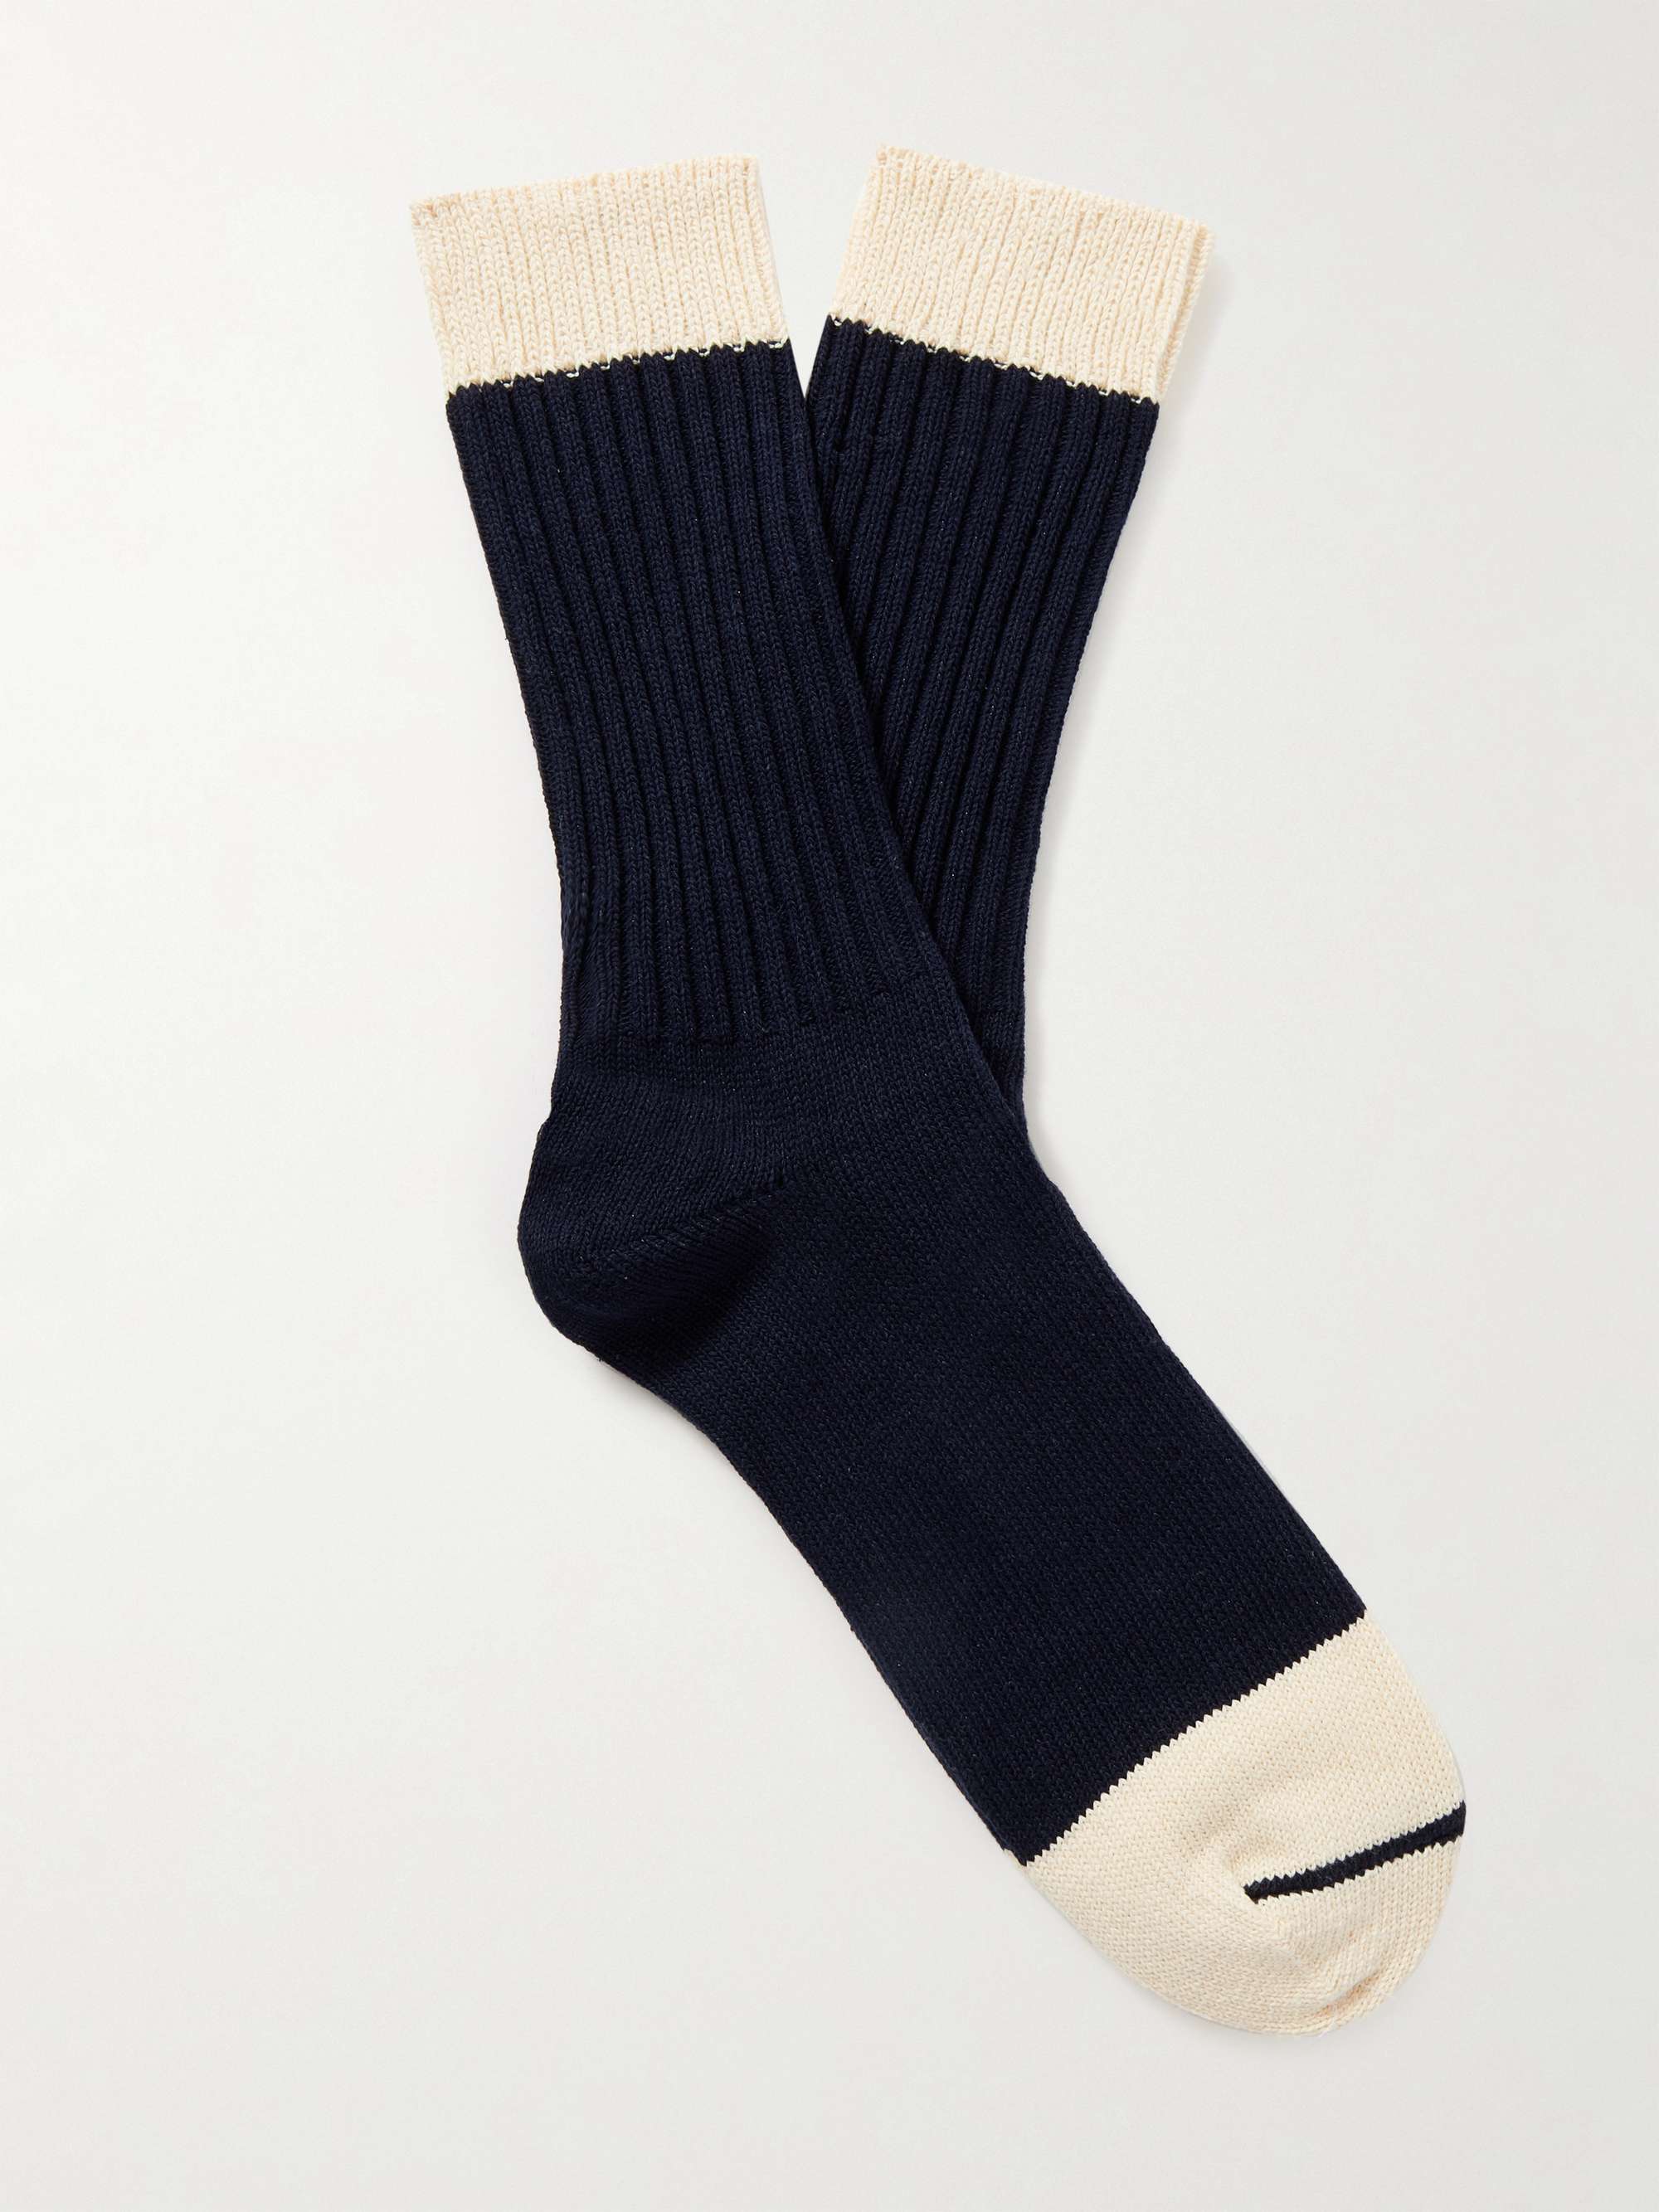 MR P. Two-Tone Recycled Cotton-Blend Socks